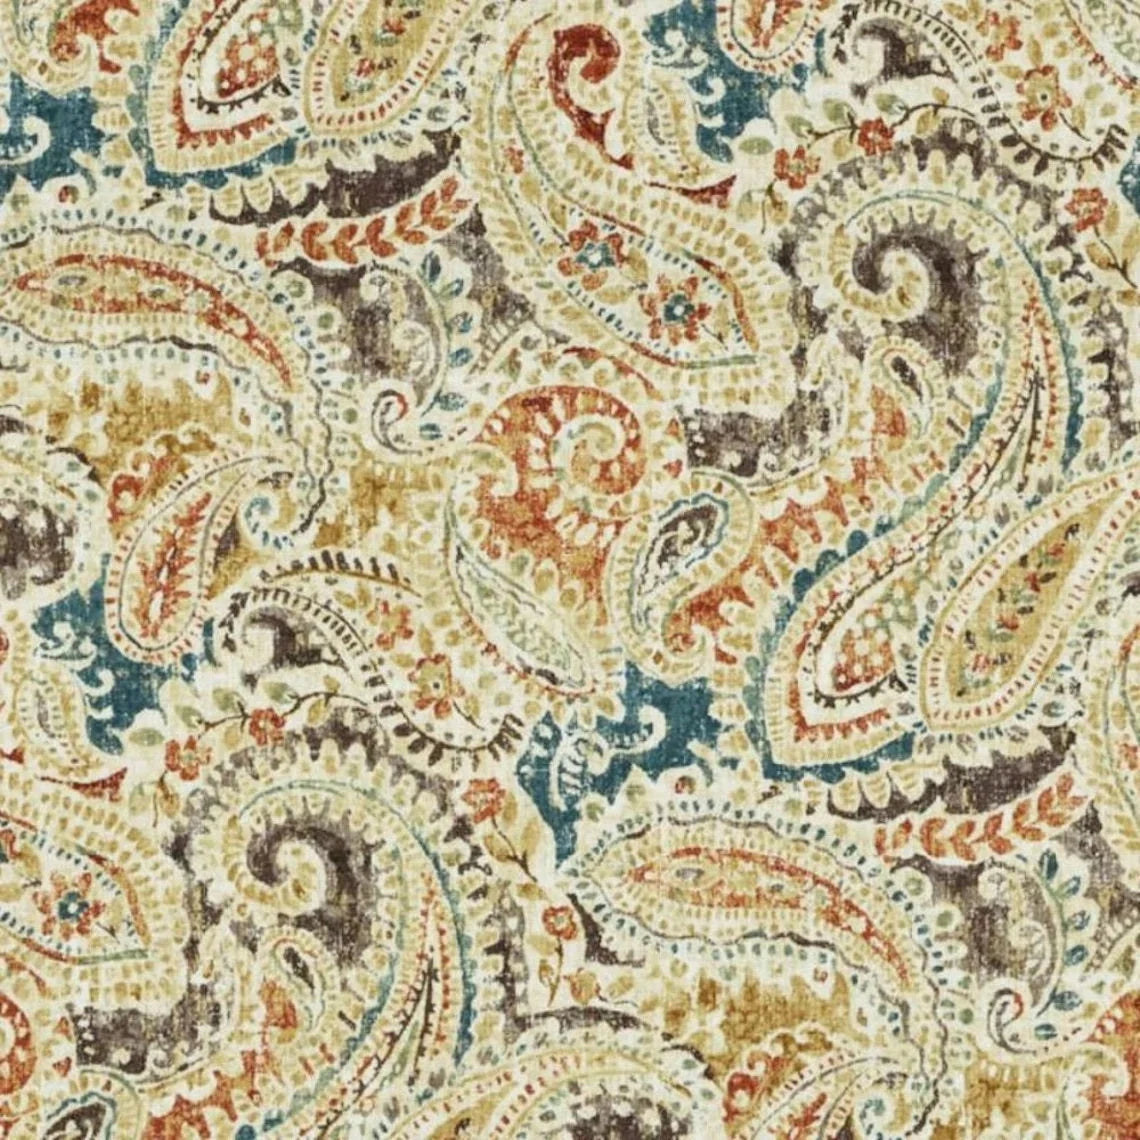 duvet cover in pisces sienna weathered paisley- large scale